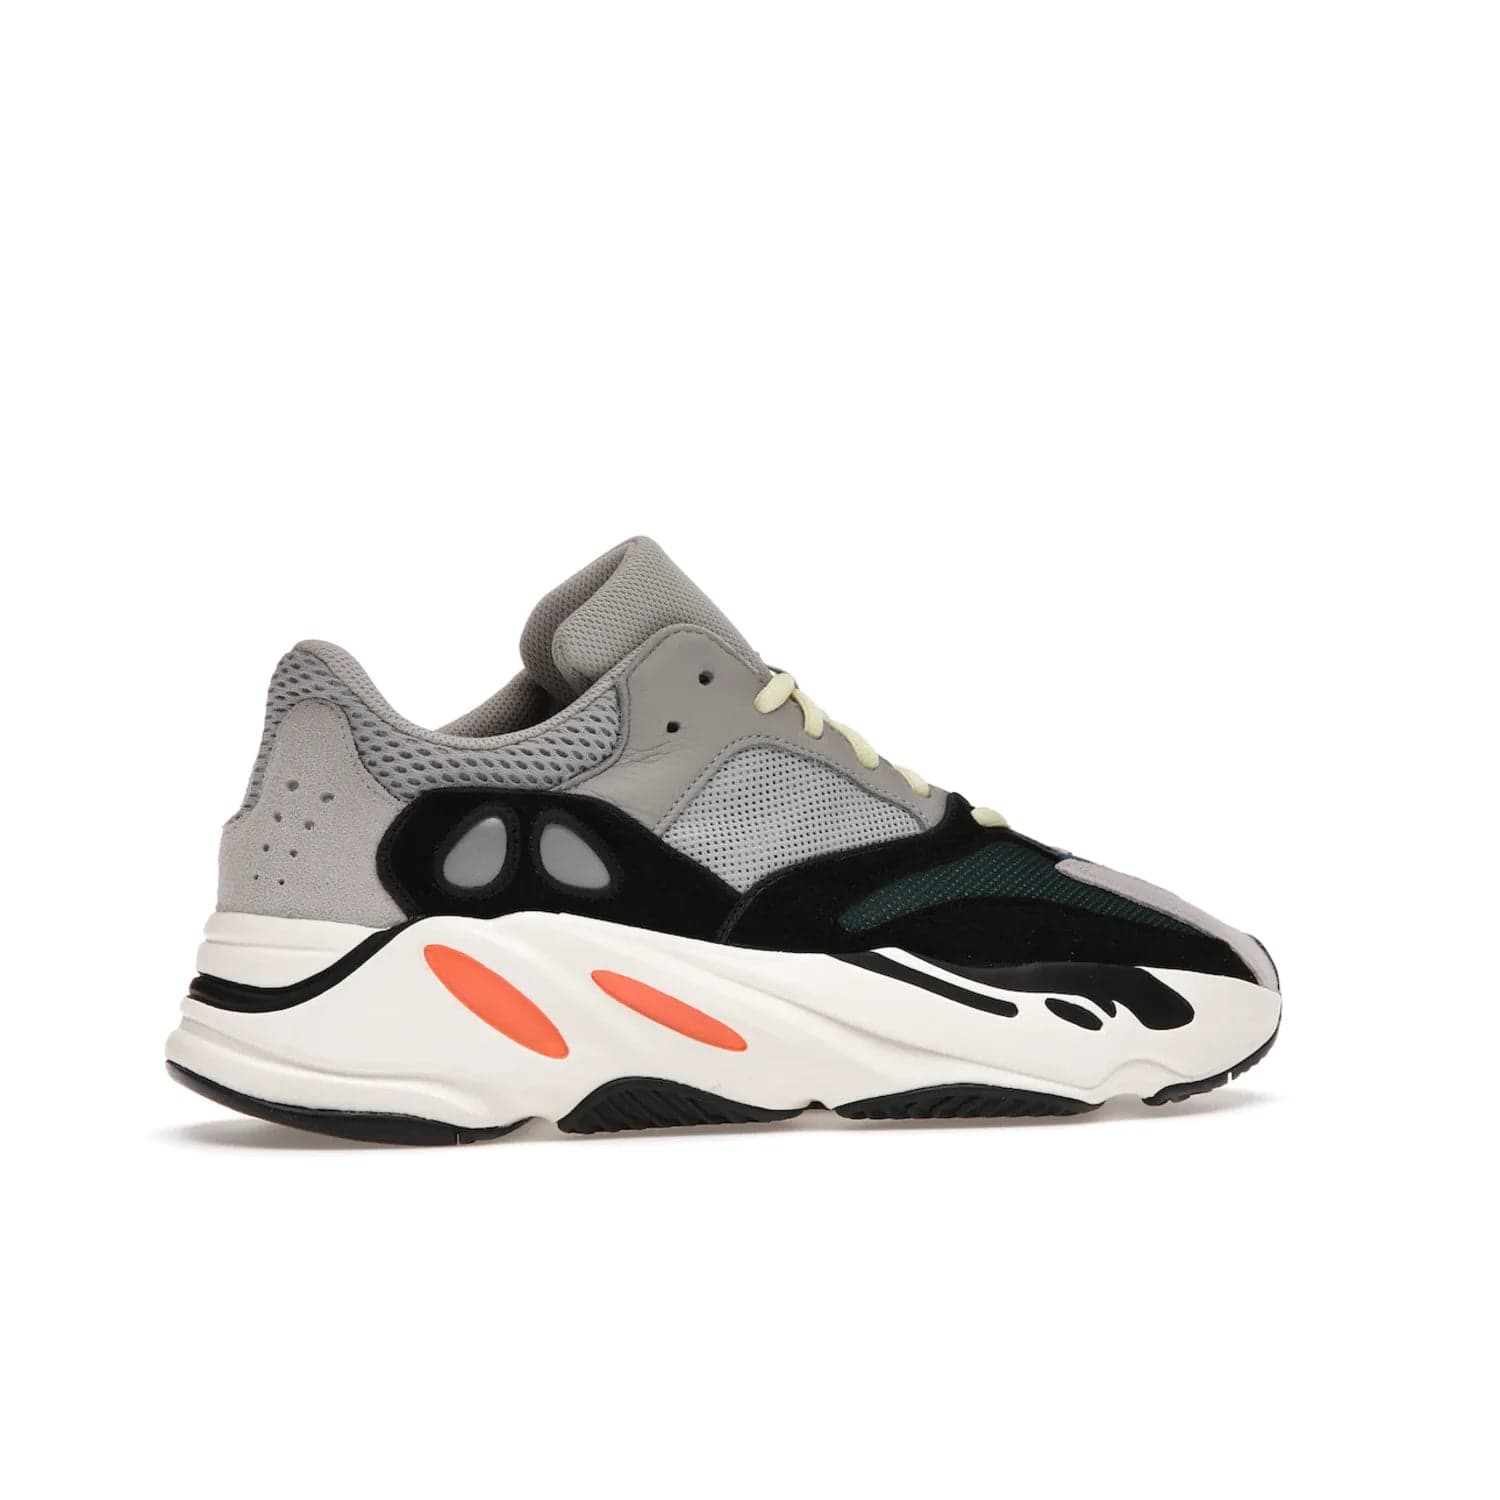 adidas Yeezy Boost 700 Wave Runner - Image 35 - Only at www.BallersClubKickz.com - Shop the iconic adidas Yeezy Boost 700 Wave Runner. Featuring grey mesh and leather upper, black suede overlays, teal mesh underlays, and signature Boost sole. Be bold & make a statement.